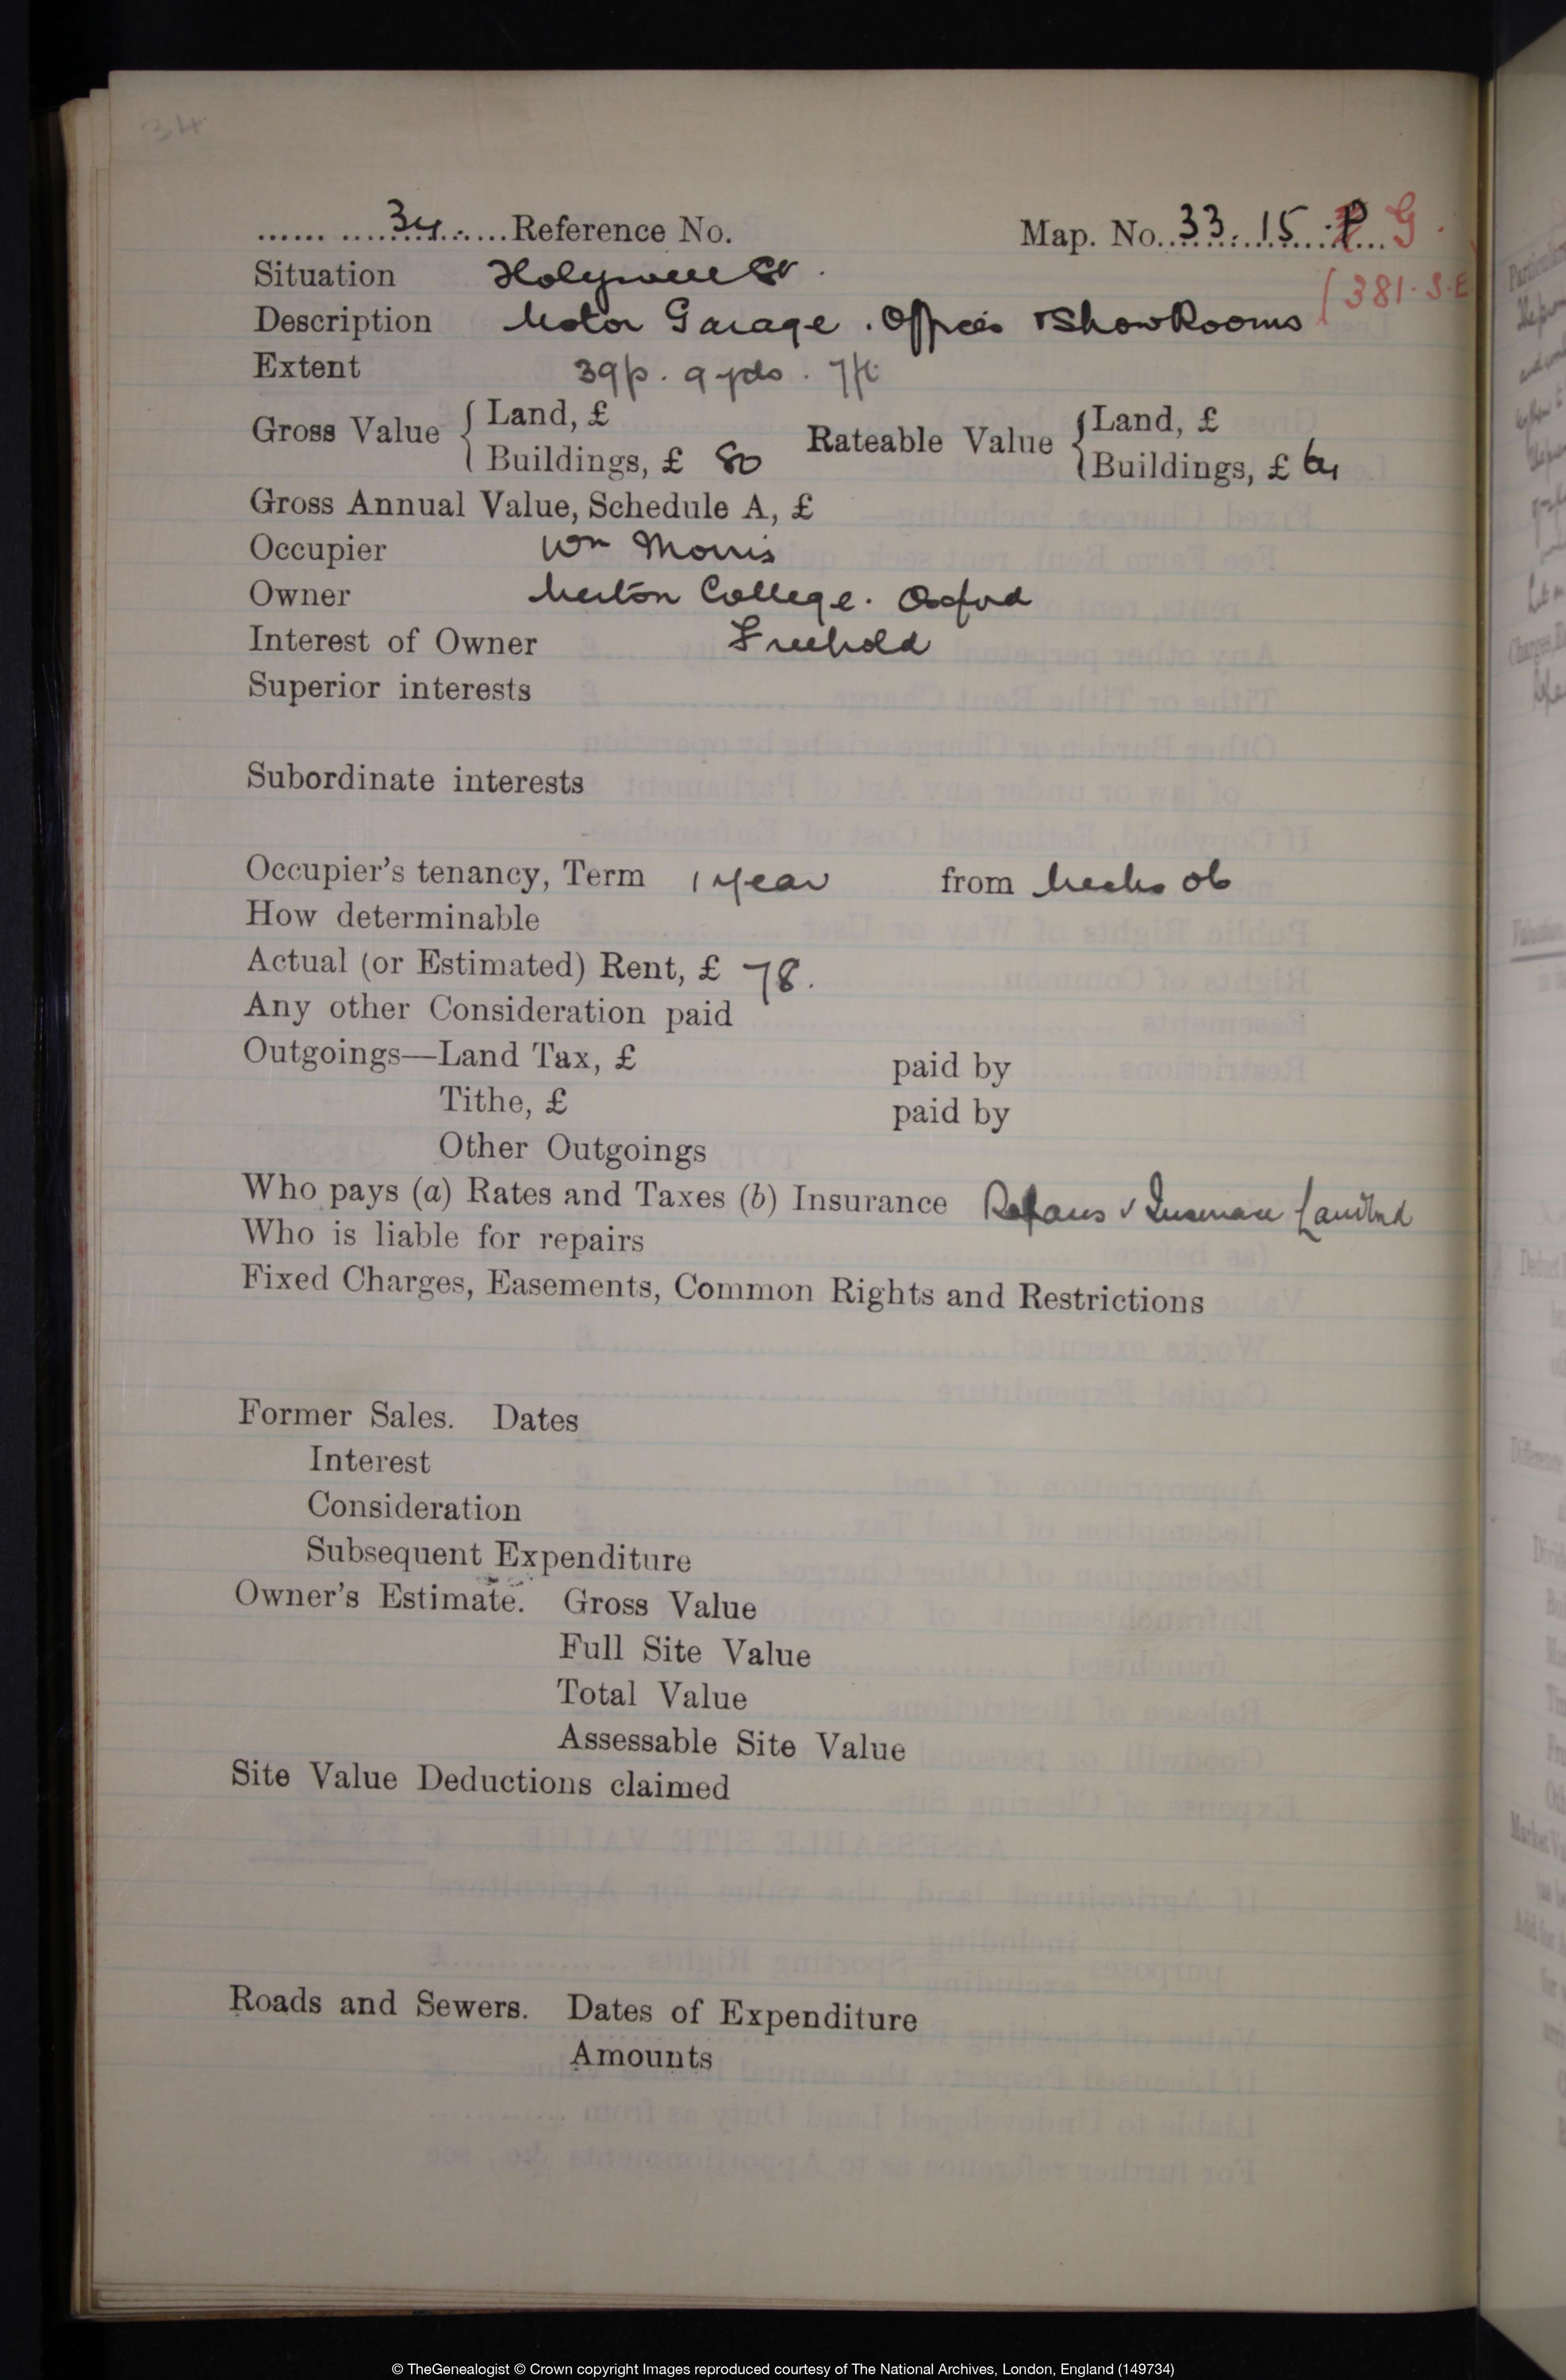 The IR58 Field Book for the new Morris Garage found in the Lloyd George Domesday Survey on TheGenealogist with a description for the new Morris Garage